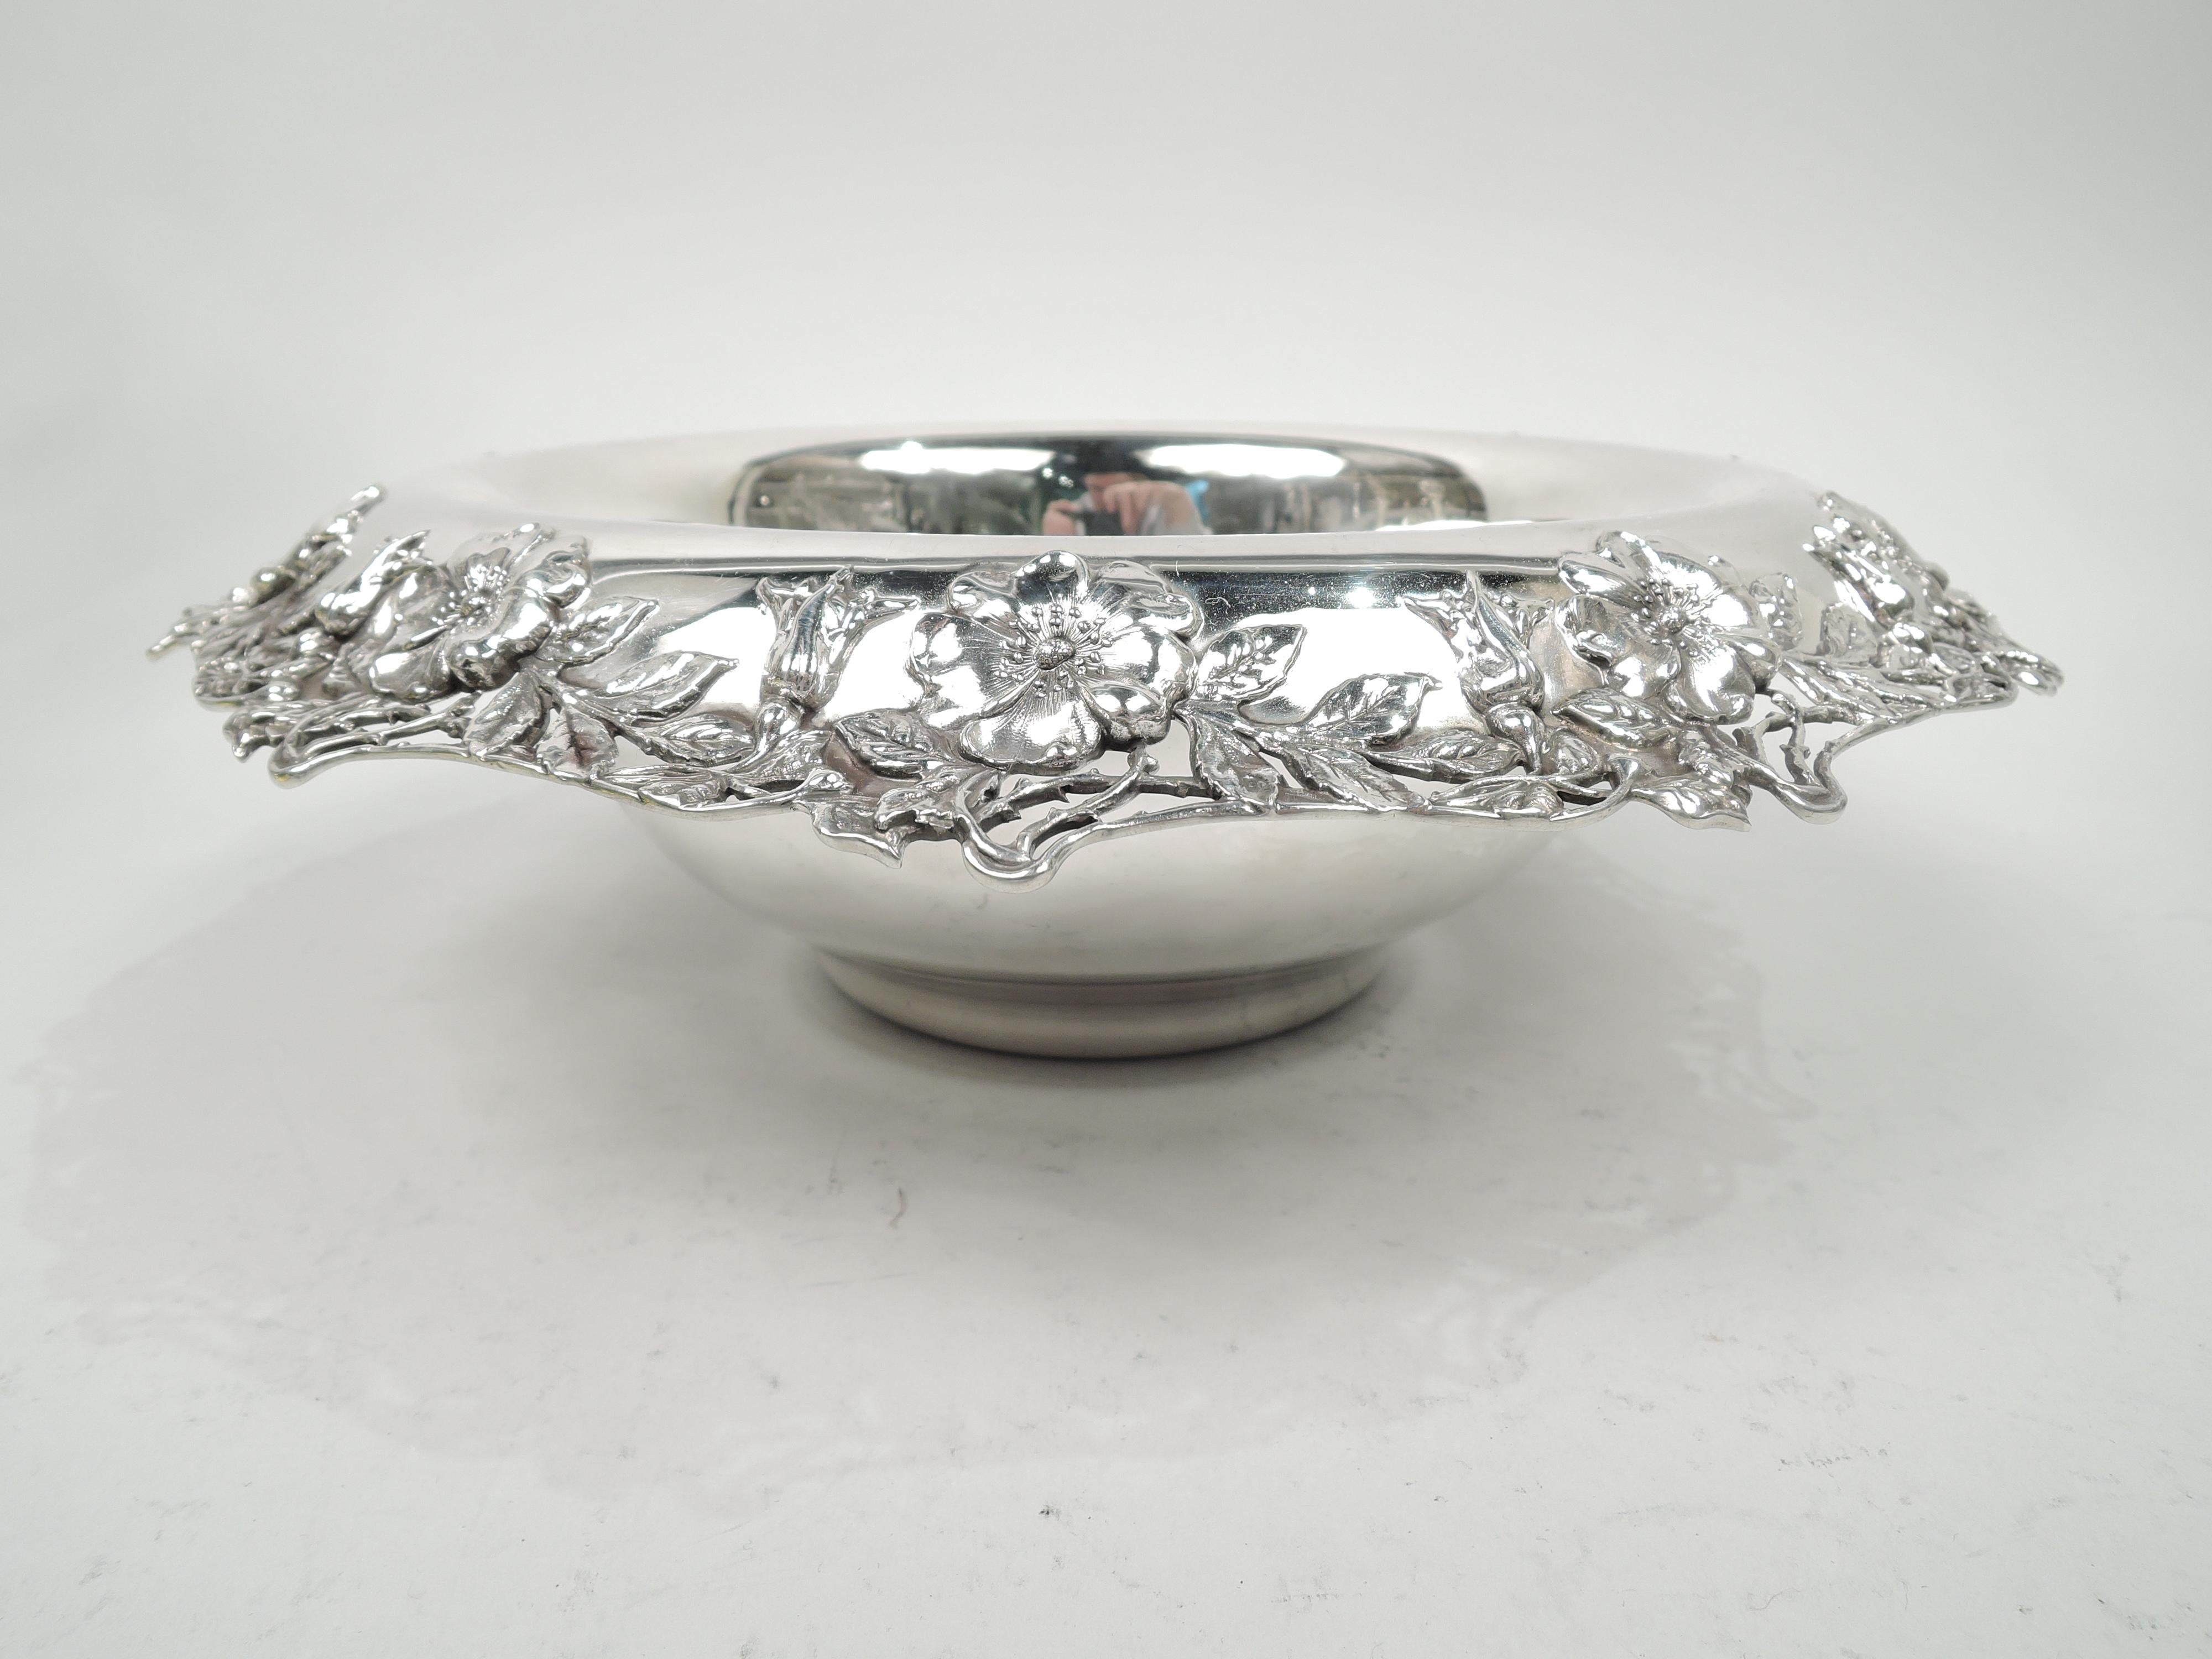 Art Nouveau sterling silver bowl. Round with curved sides and inset foot. Made by Tiffany & Co. in New York, circa 1910. Rim turned-down with applied and open blossoming branches. Fresh and pretty from the turn of the last century. Fully marked